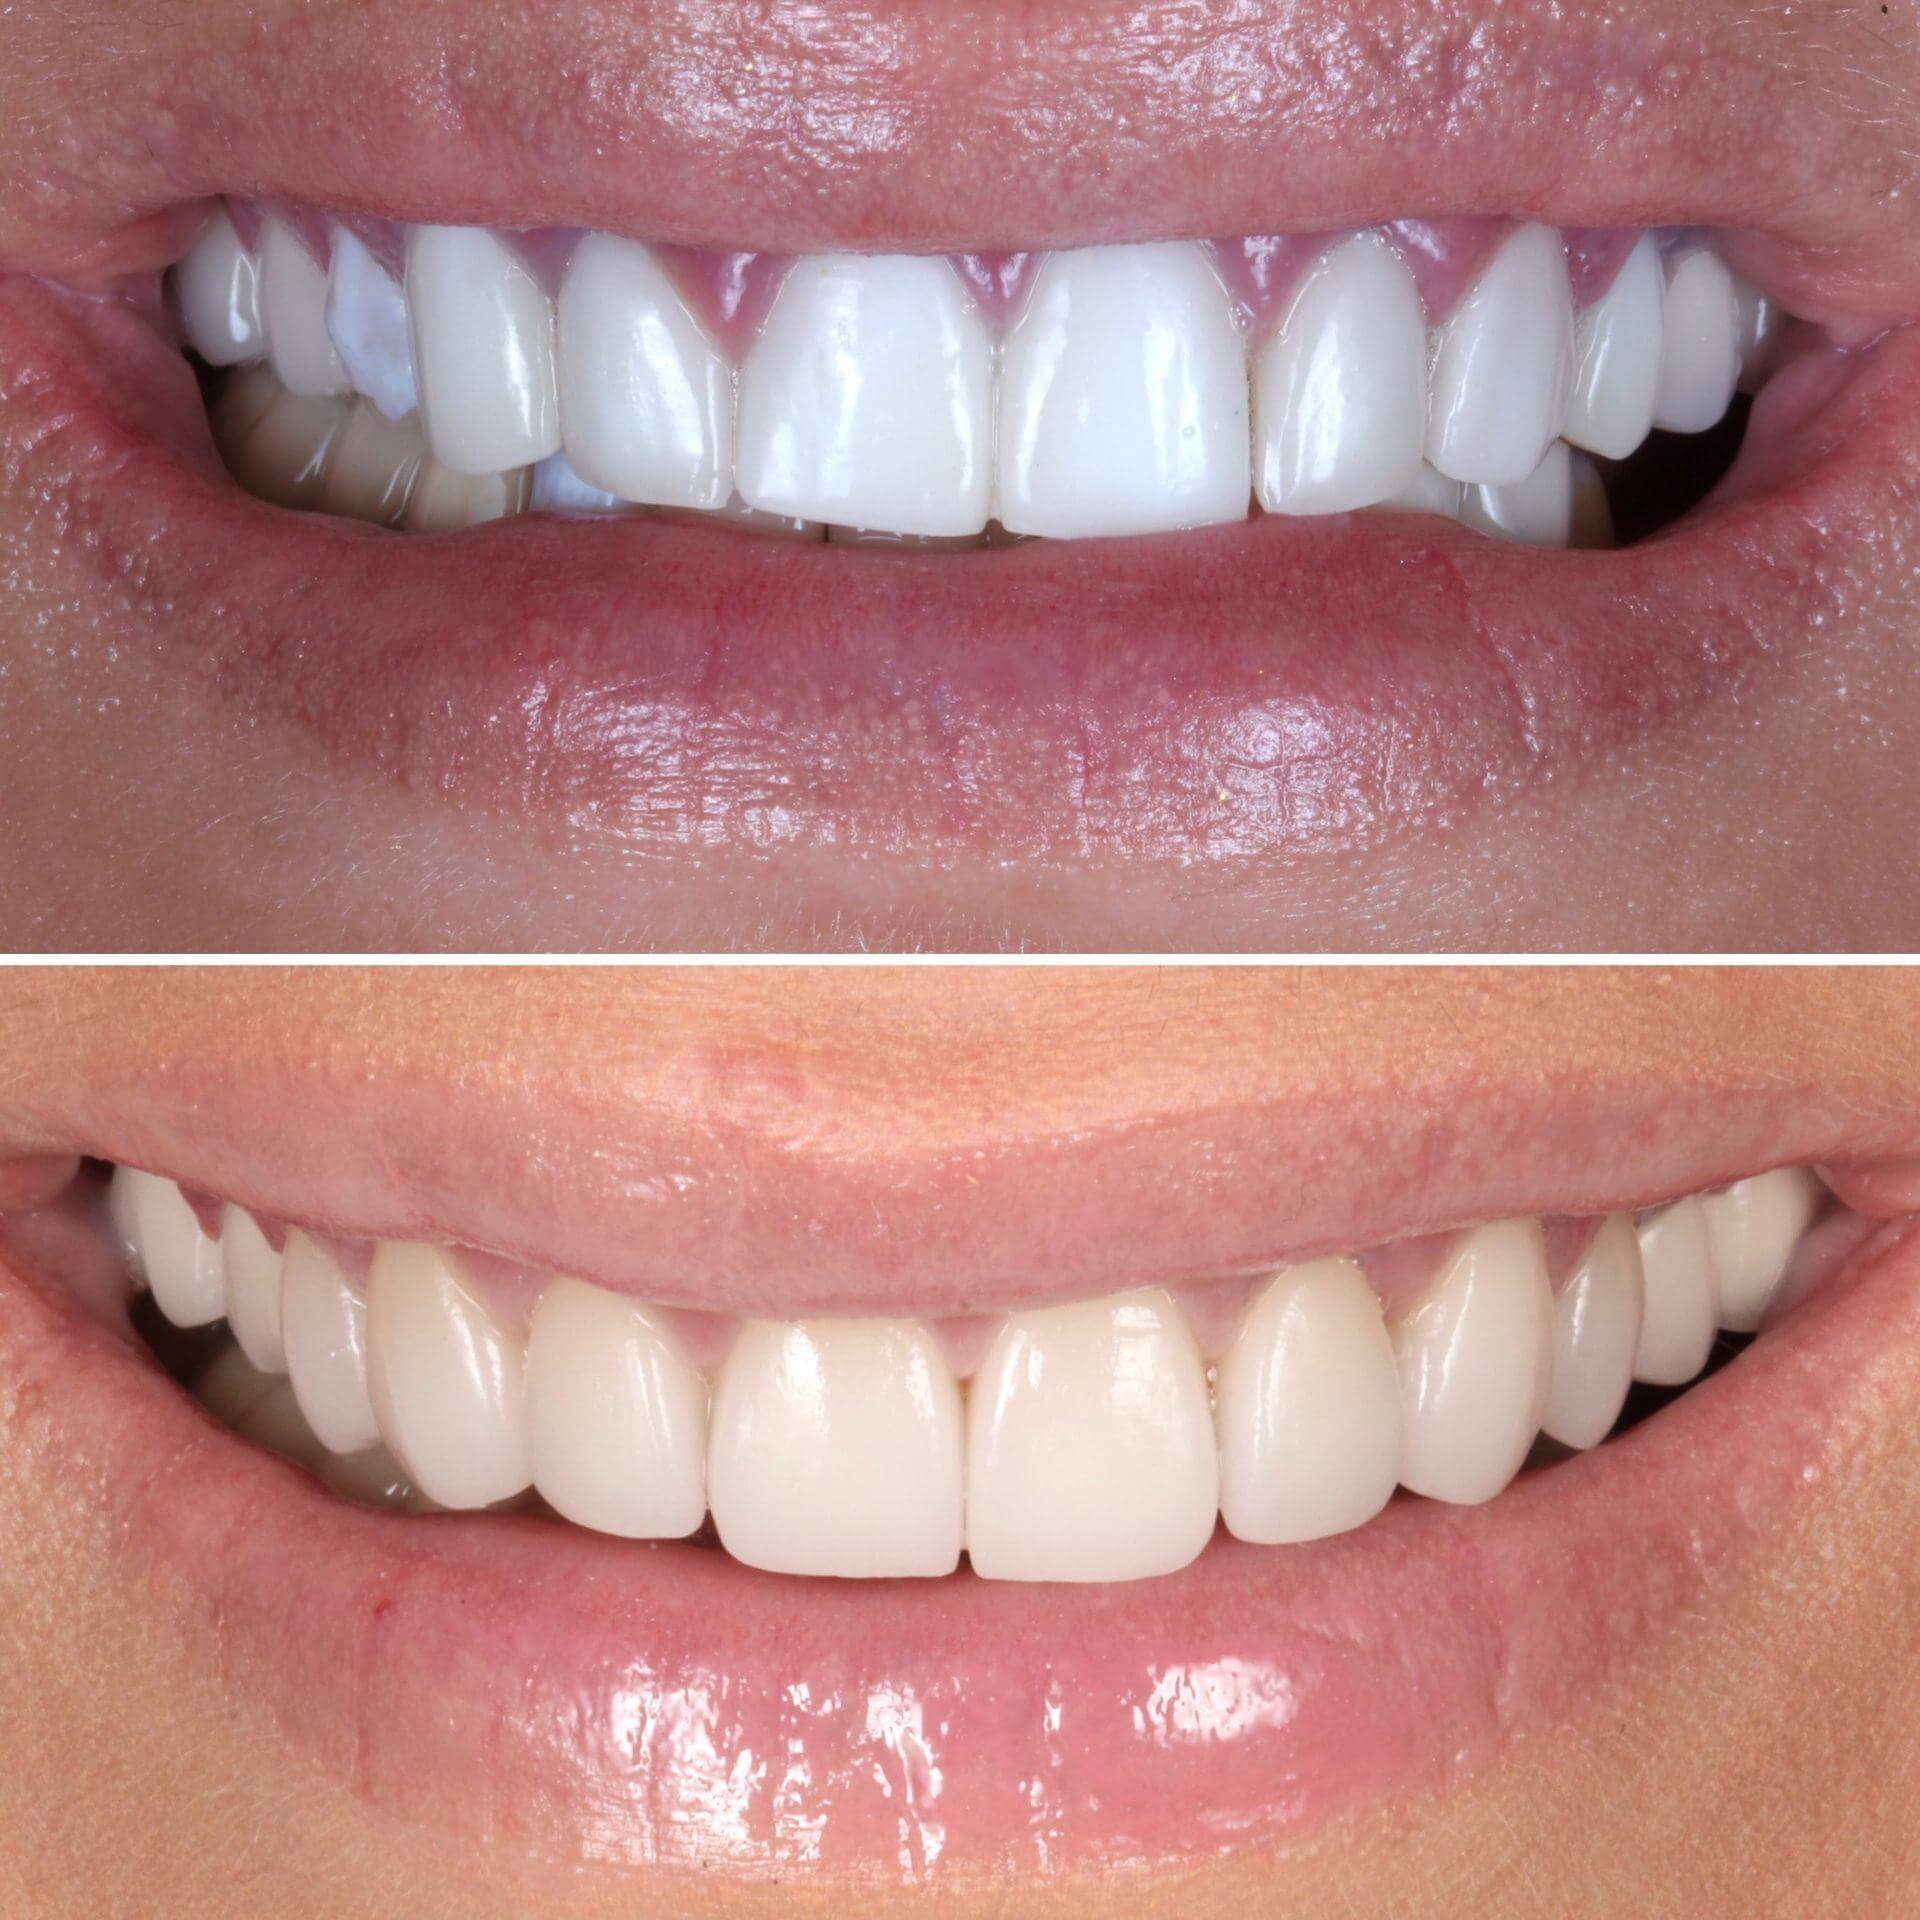 Before and After Replacing Unhealthy Veneers